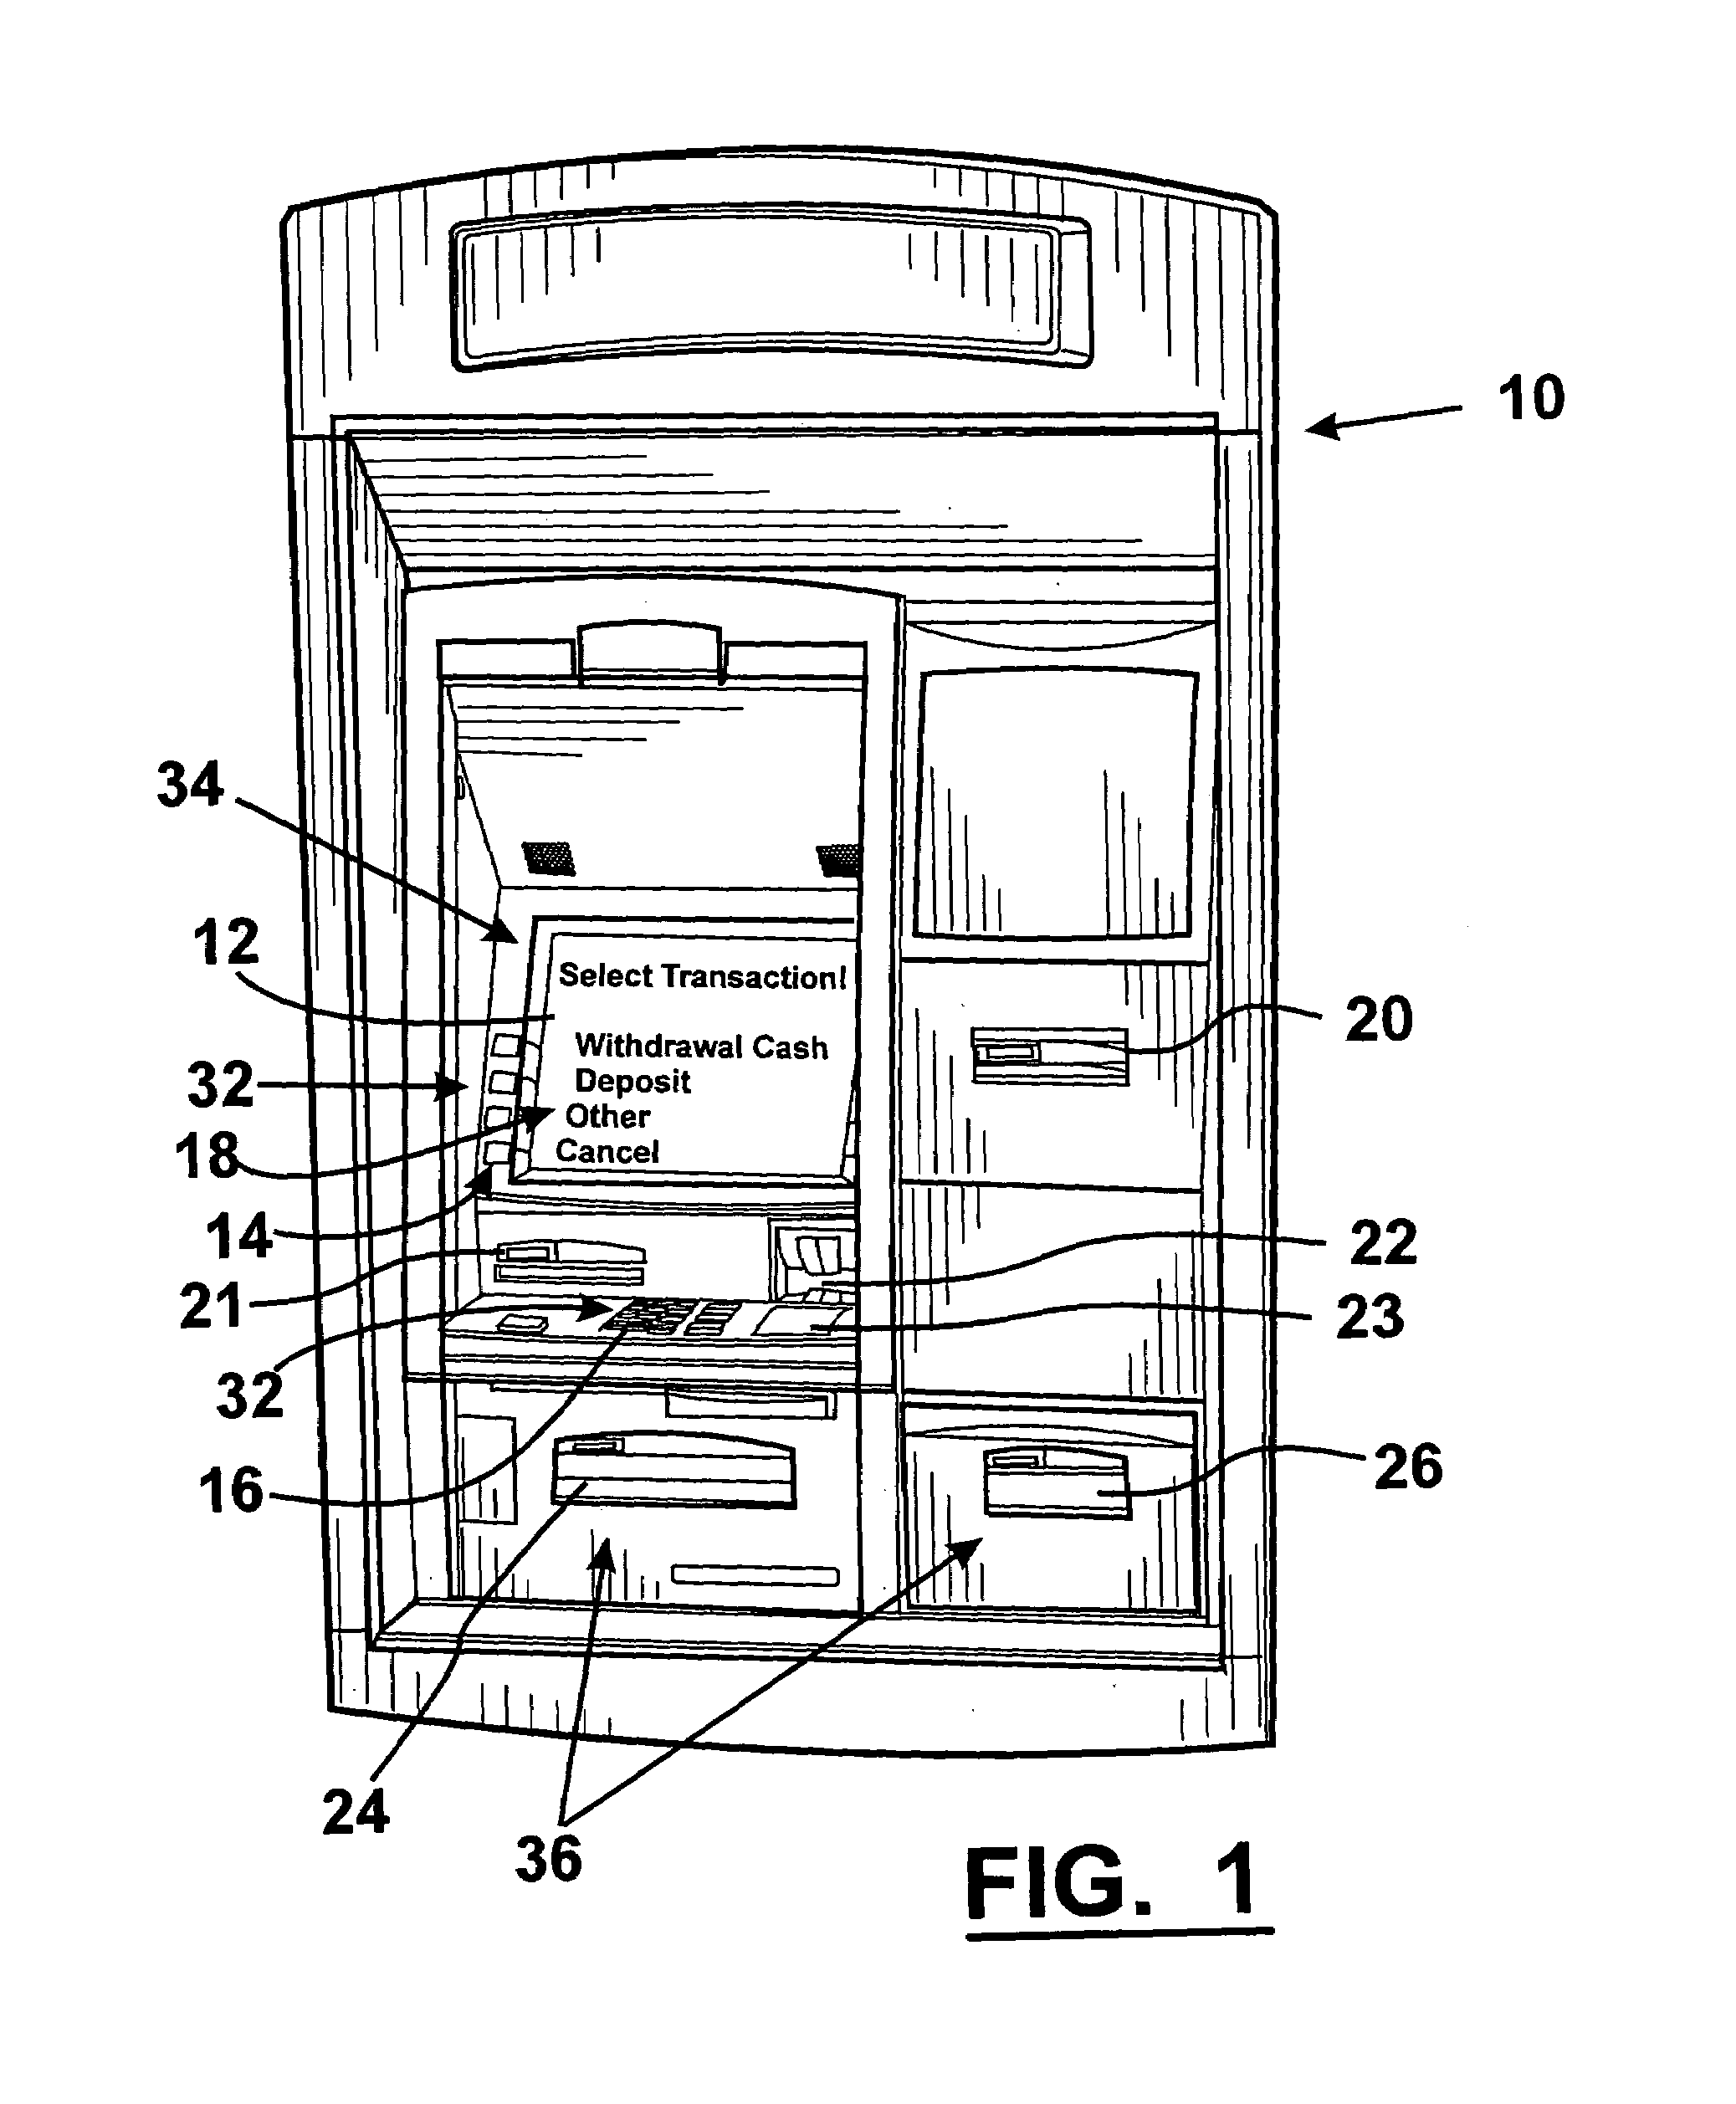 Automated banking machine component authentication system and method